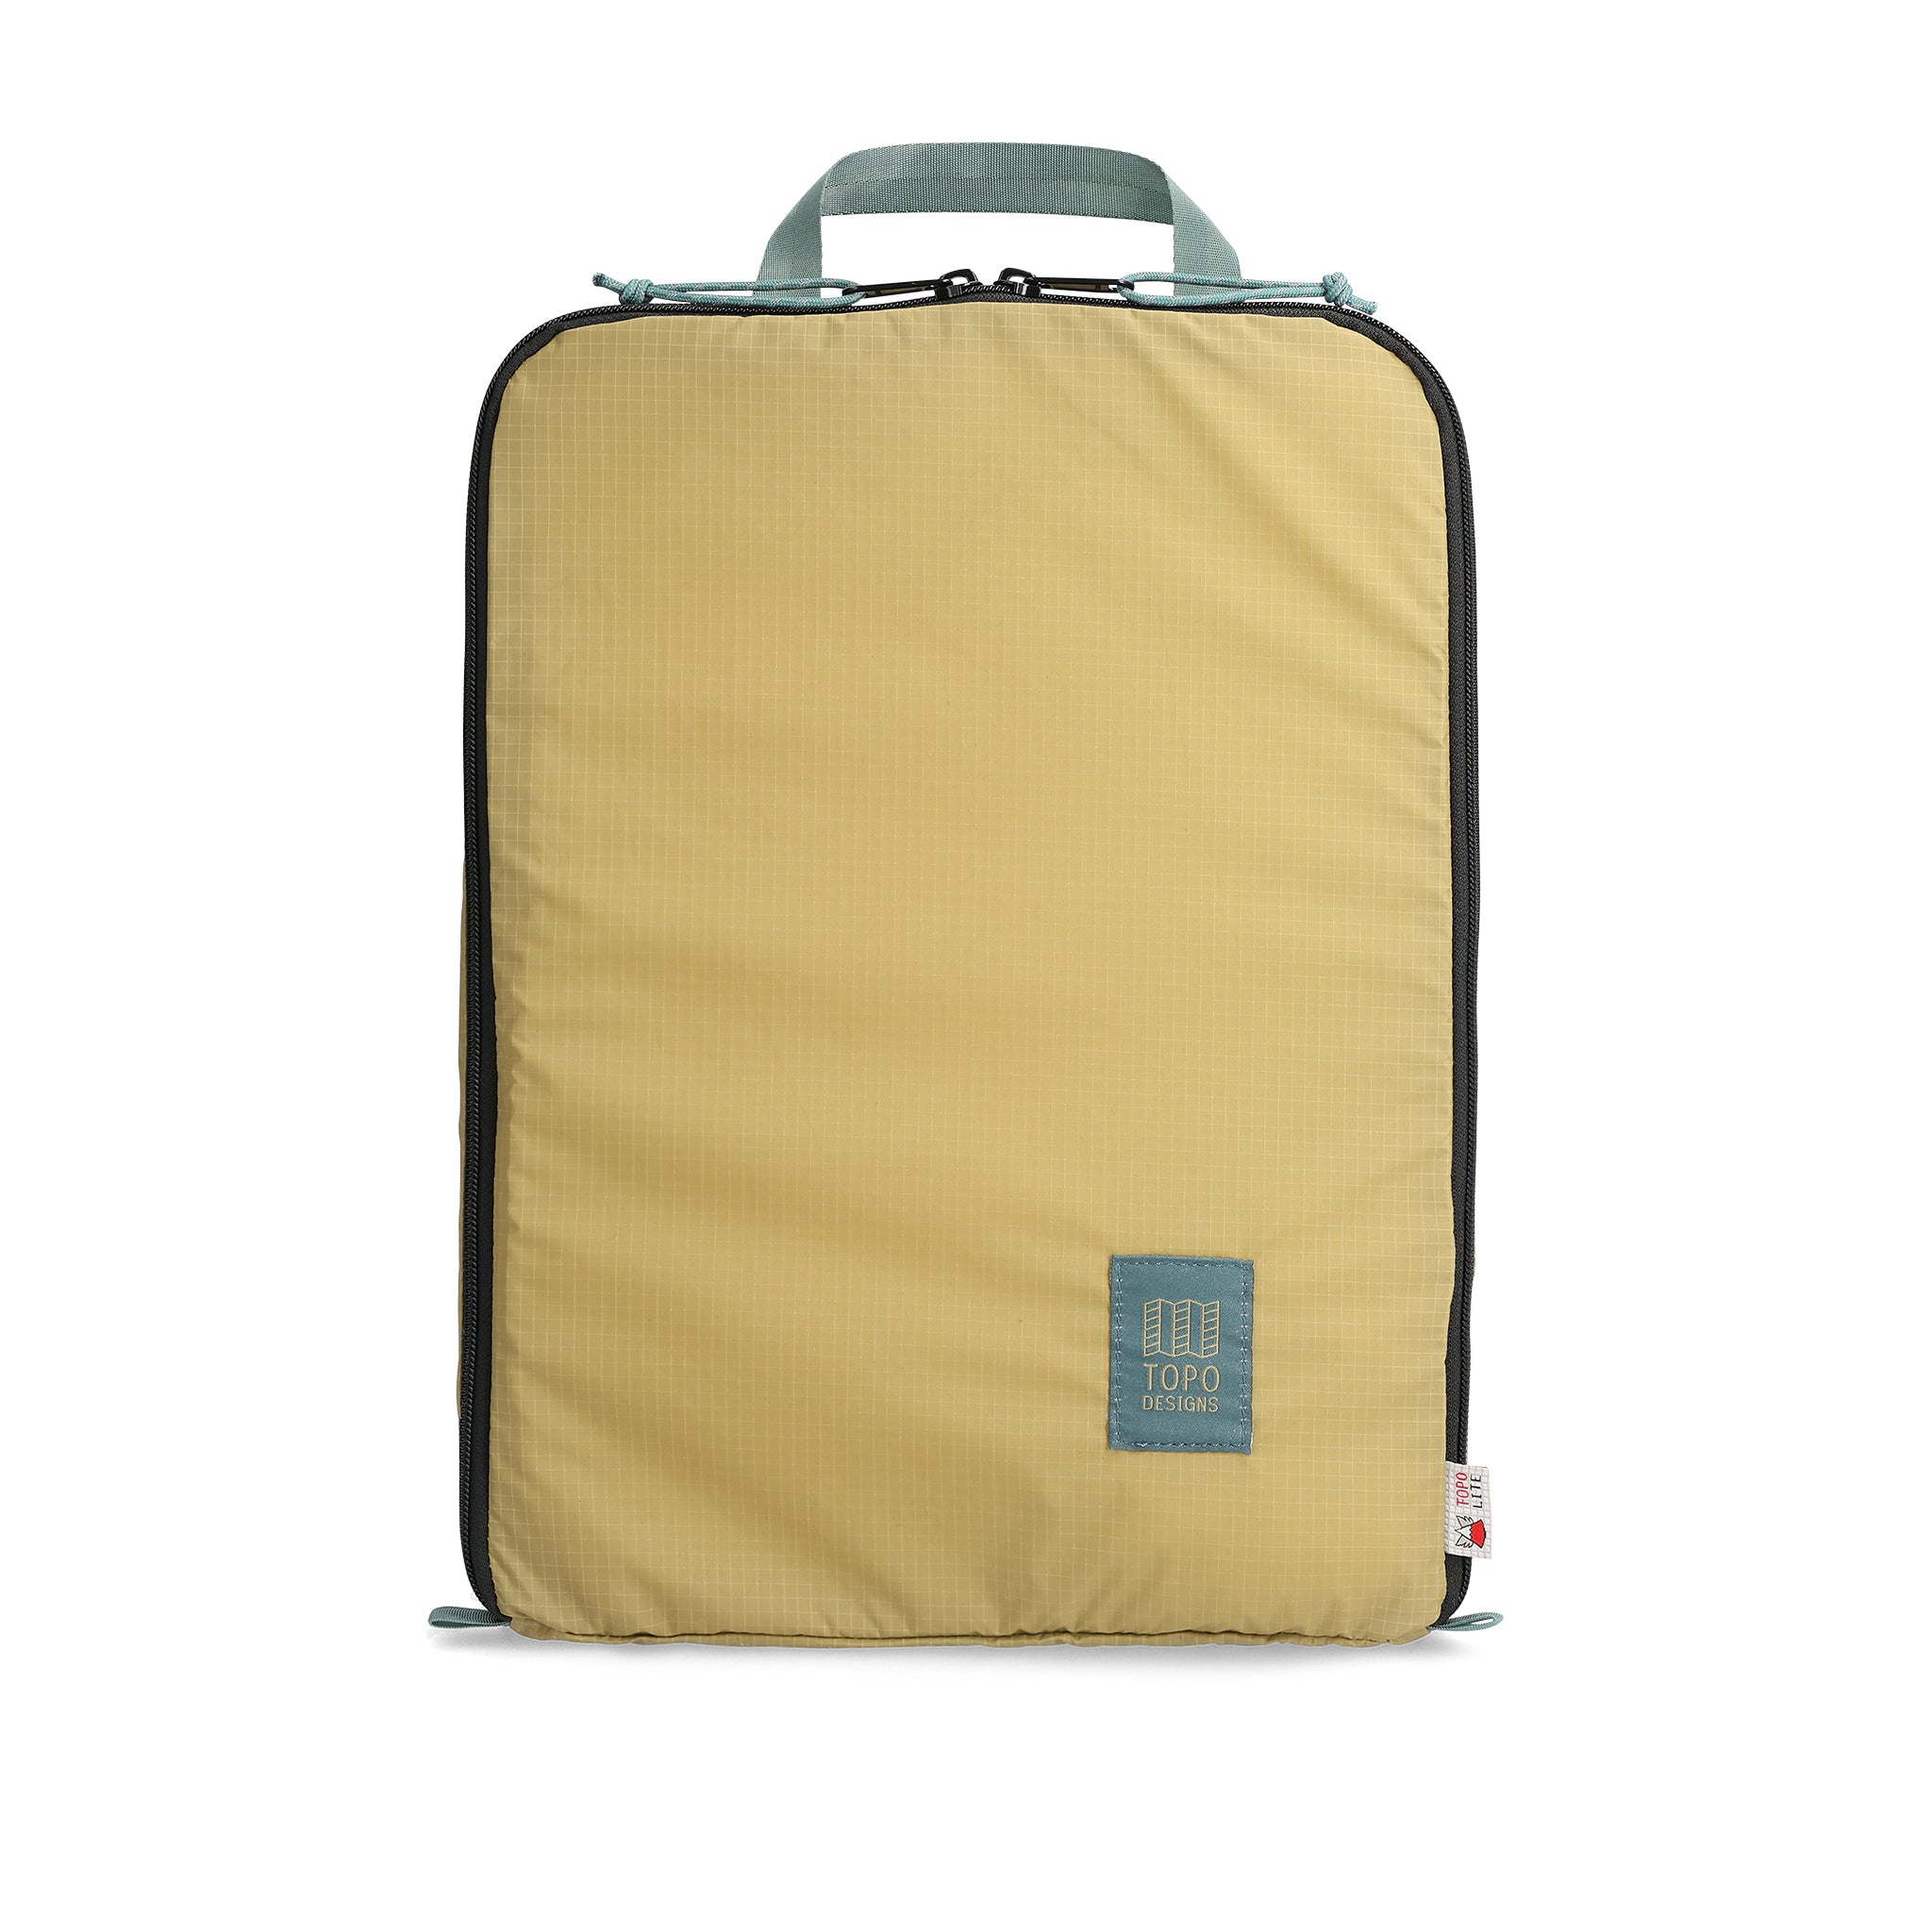 Front View of Topo Designs Topolite™ Pack Bag - 10L in "Moss"